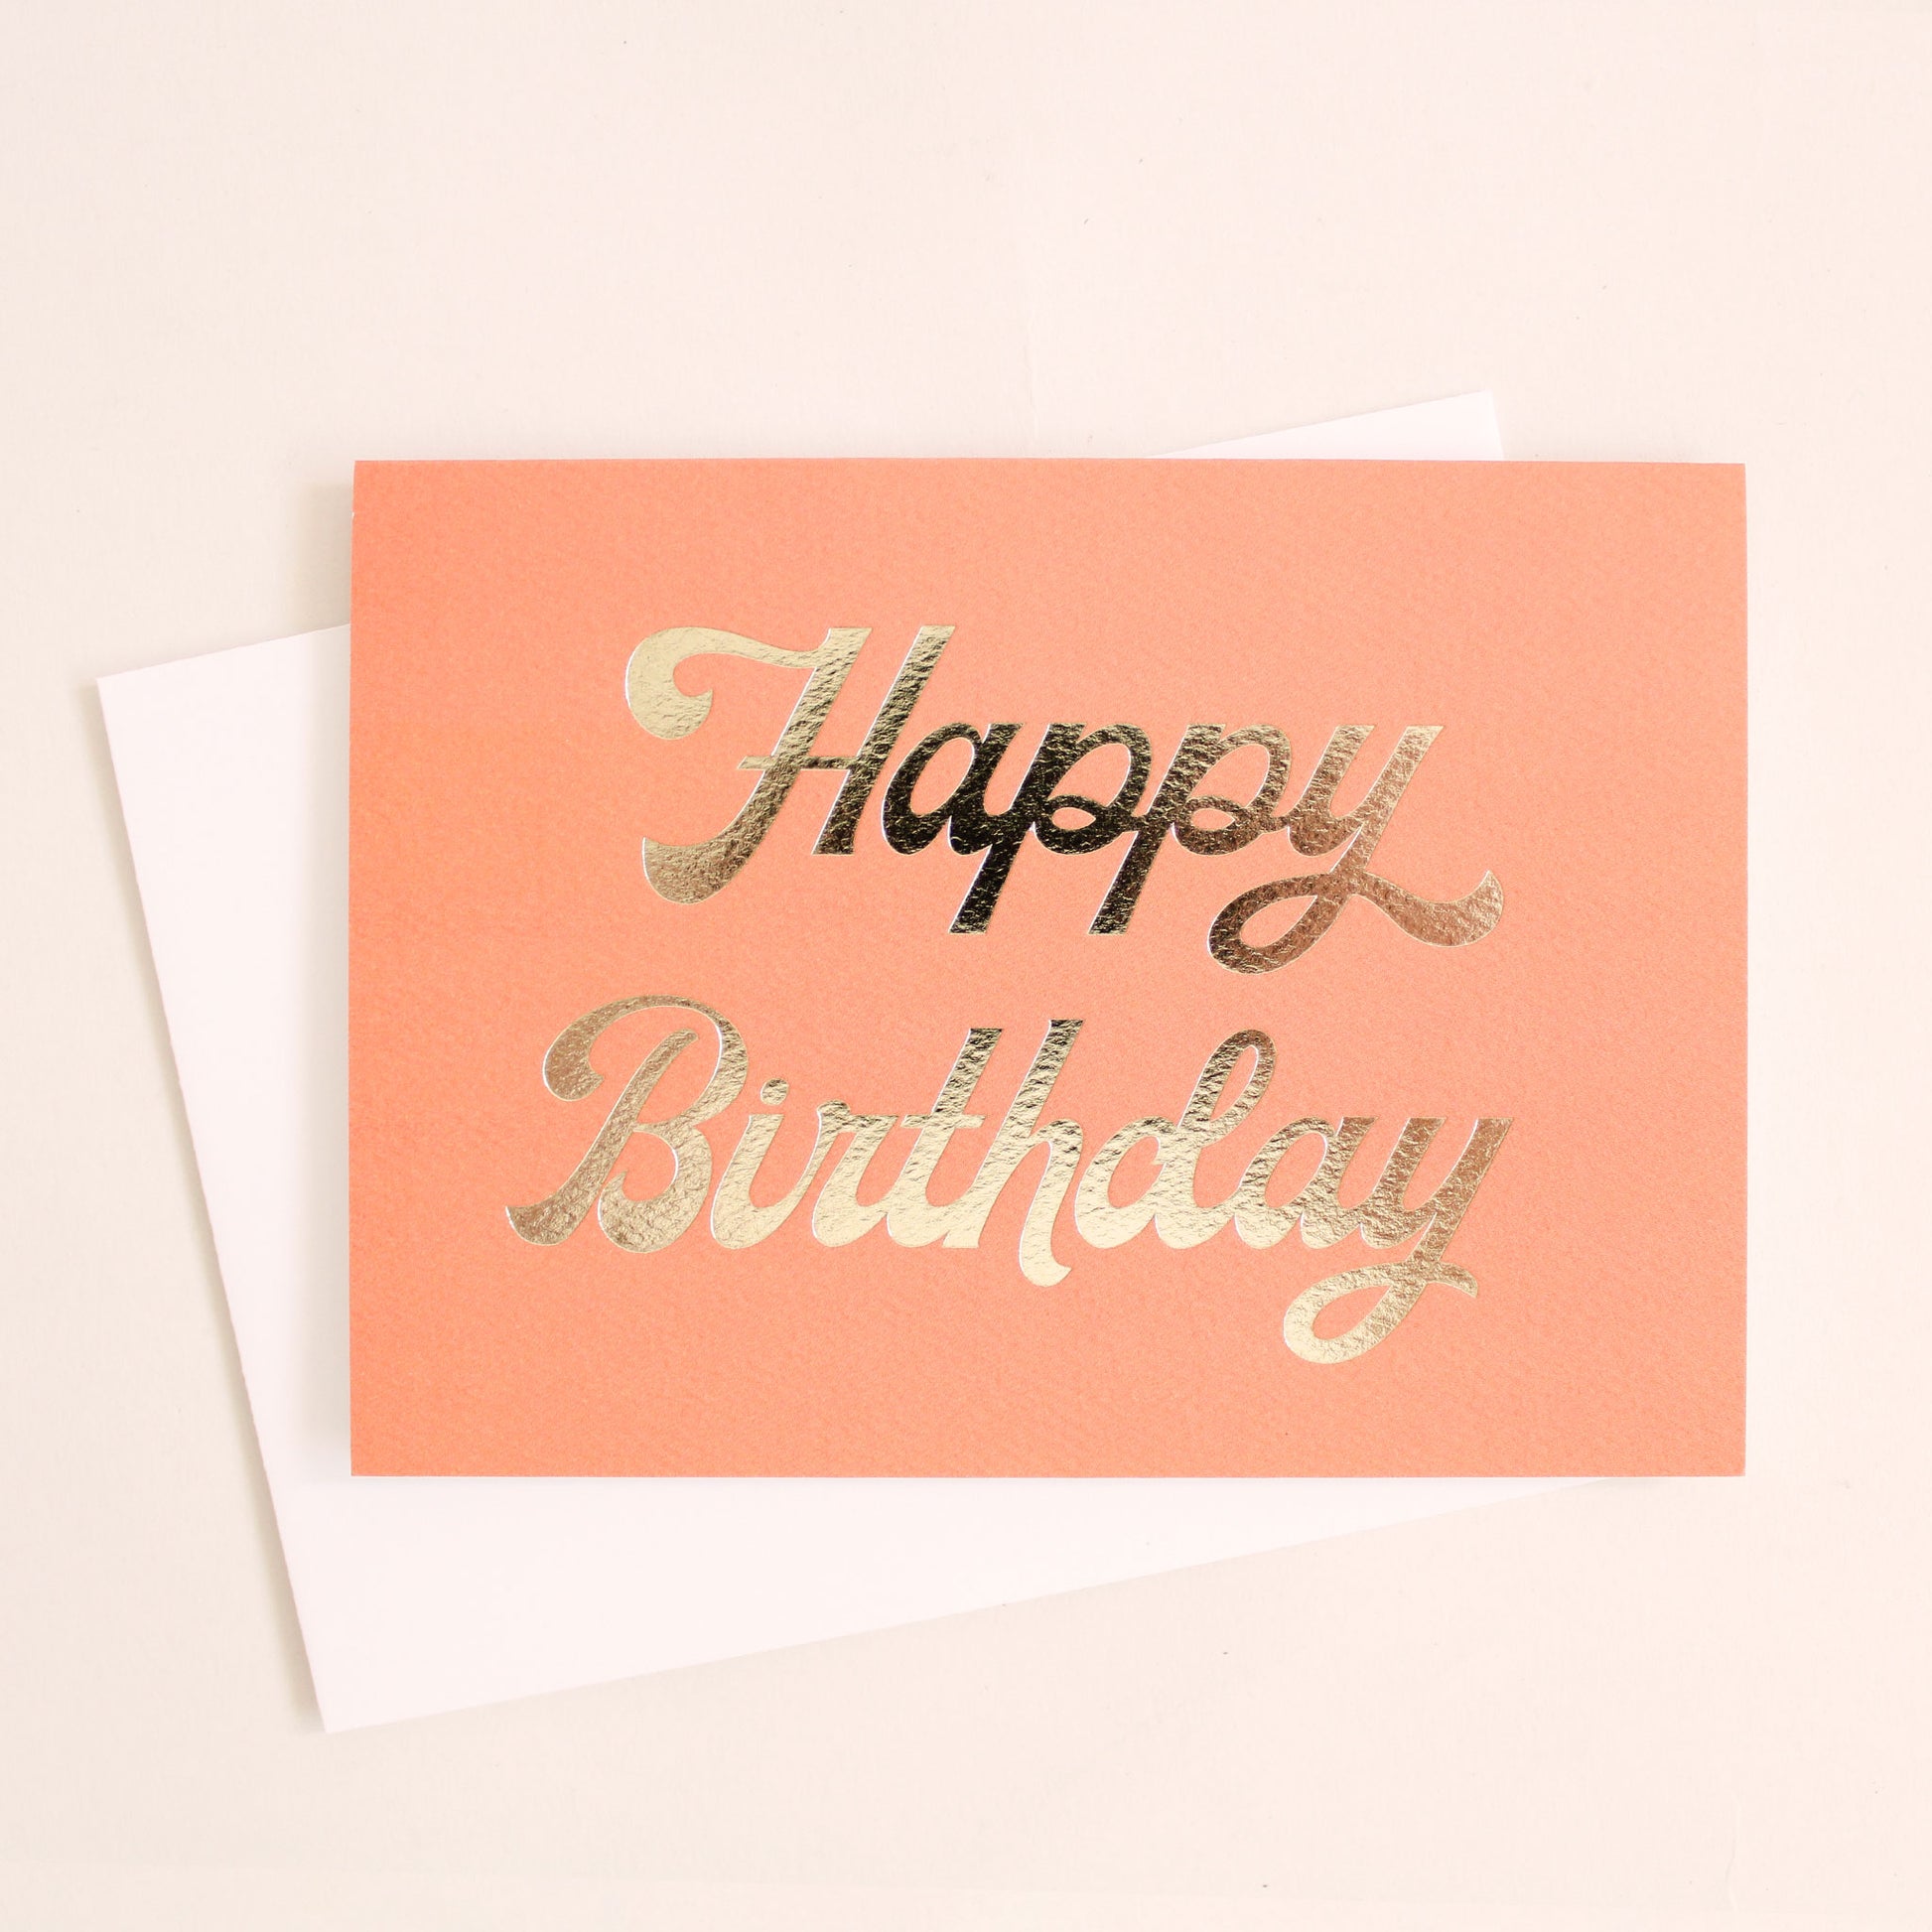 deep peached colored greeting card with gold foil text that reads happy birthday. Card is accompanied by a solid white envelope.